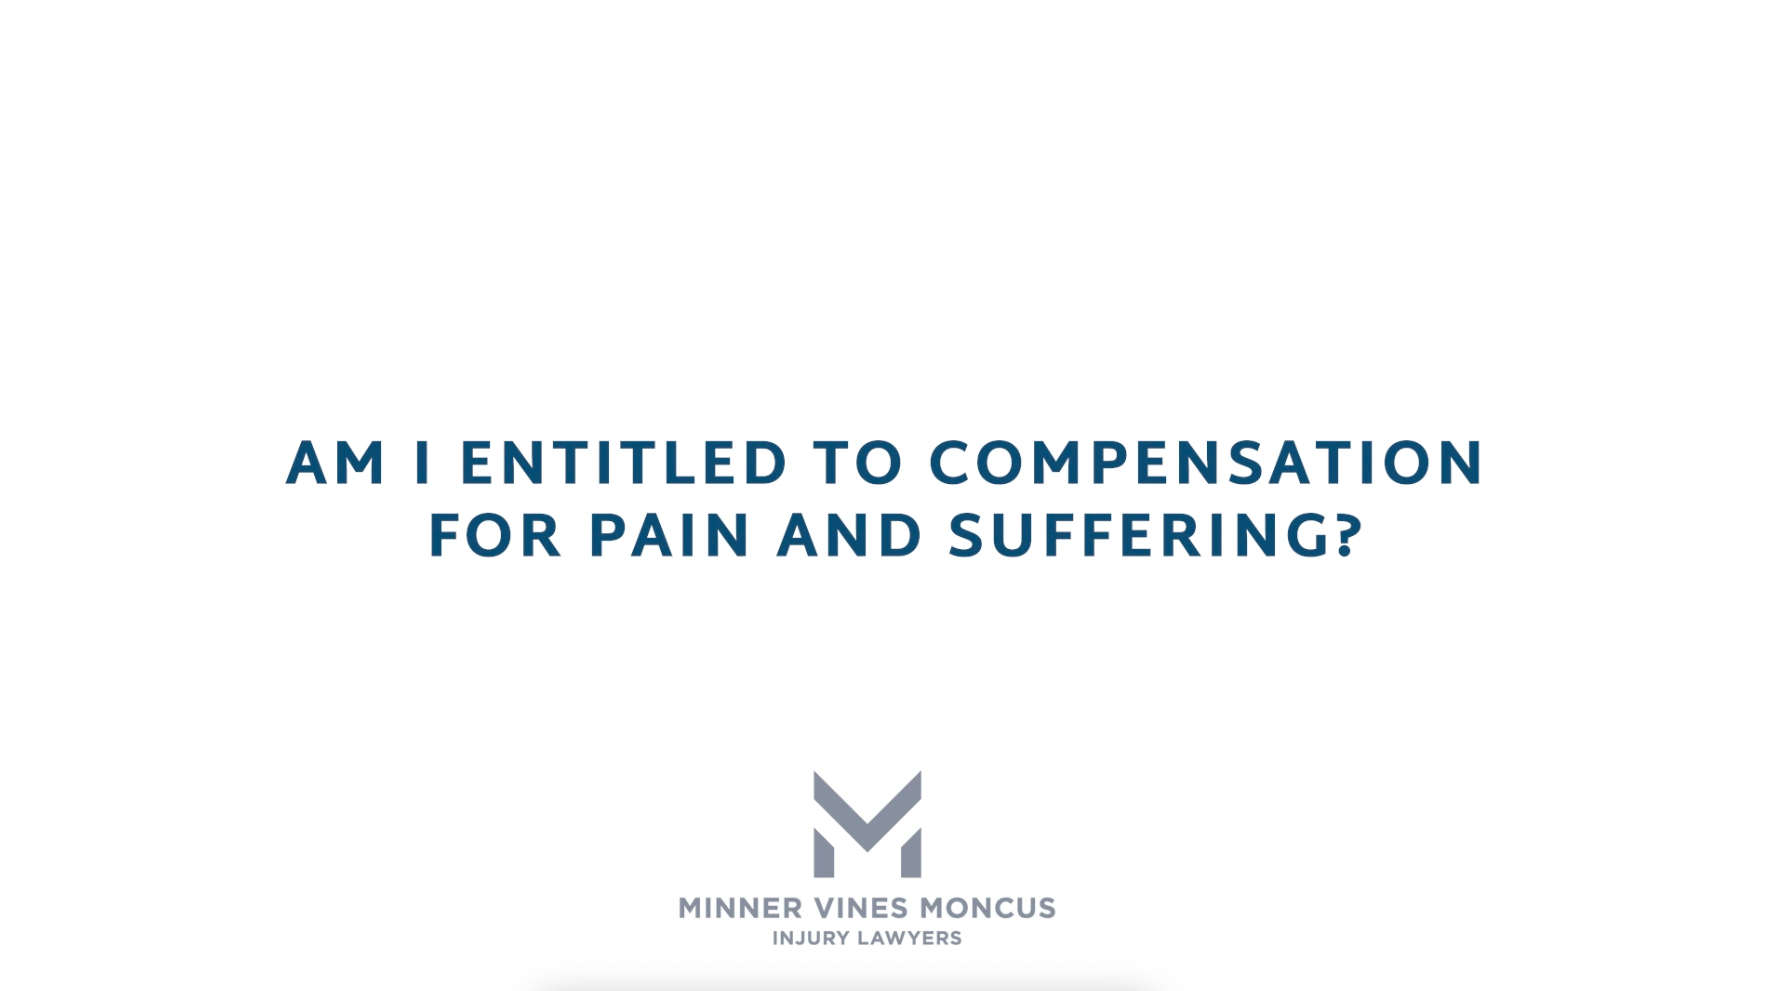 Am I entitled to compensation for pain and suffering?